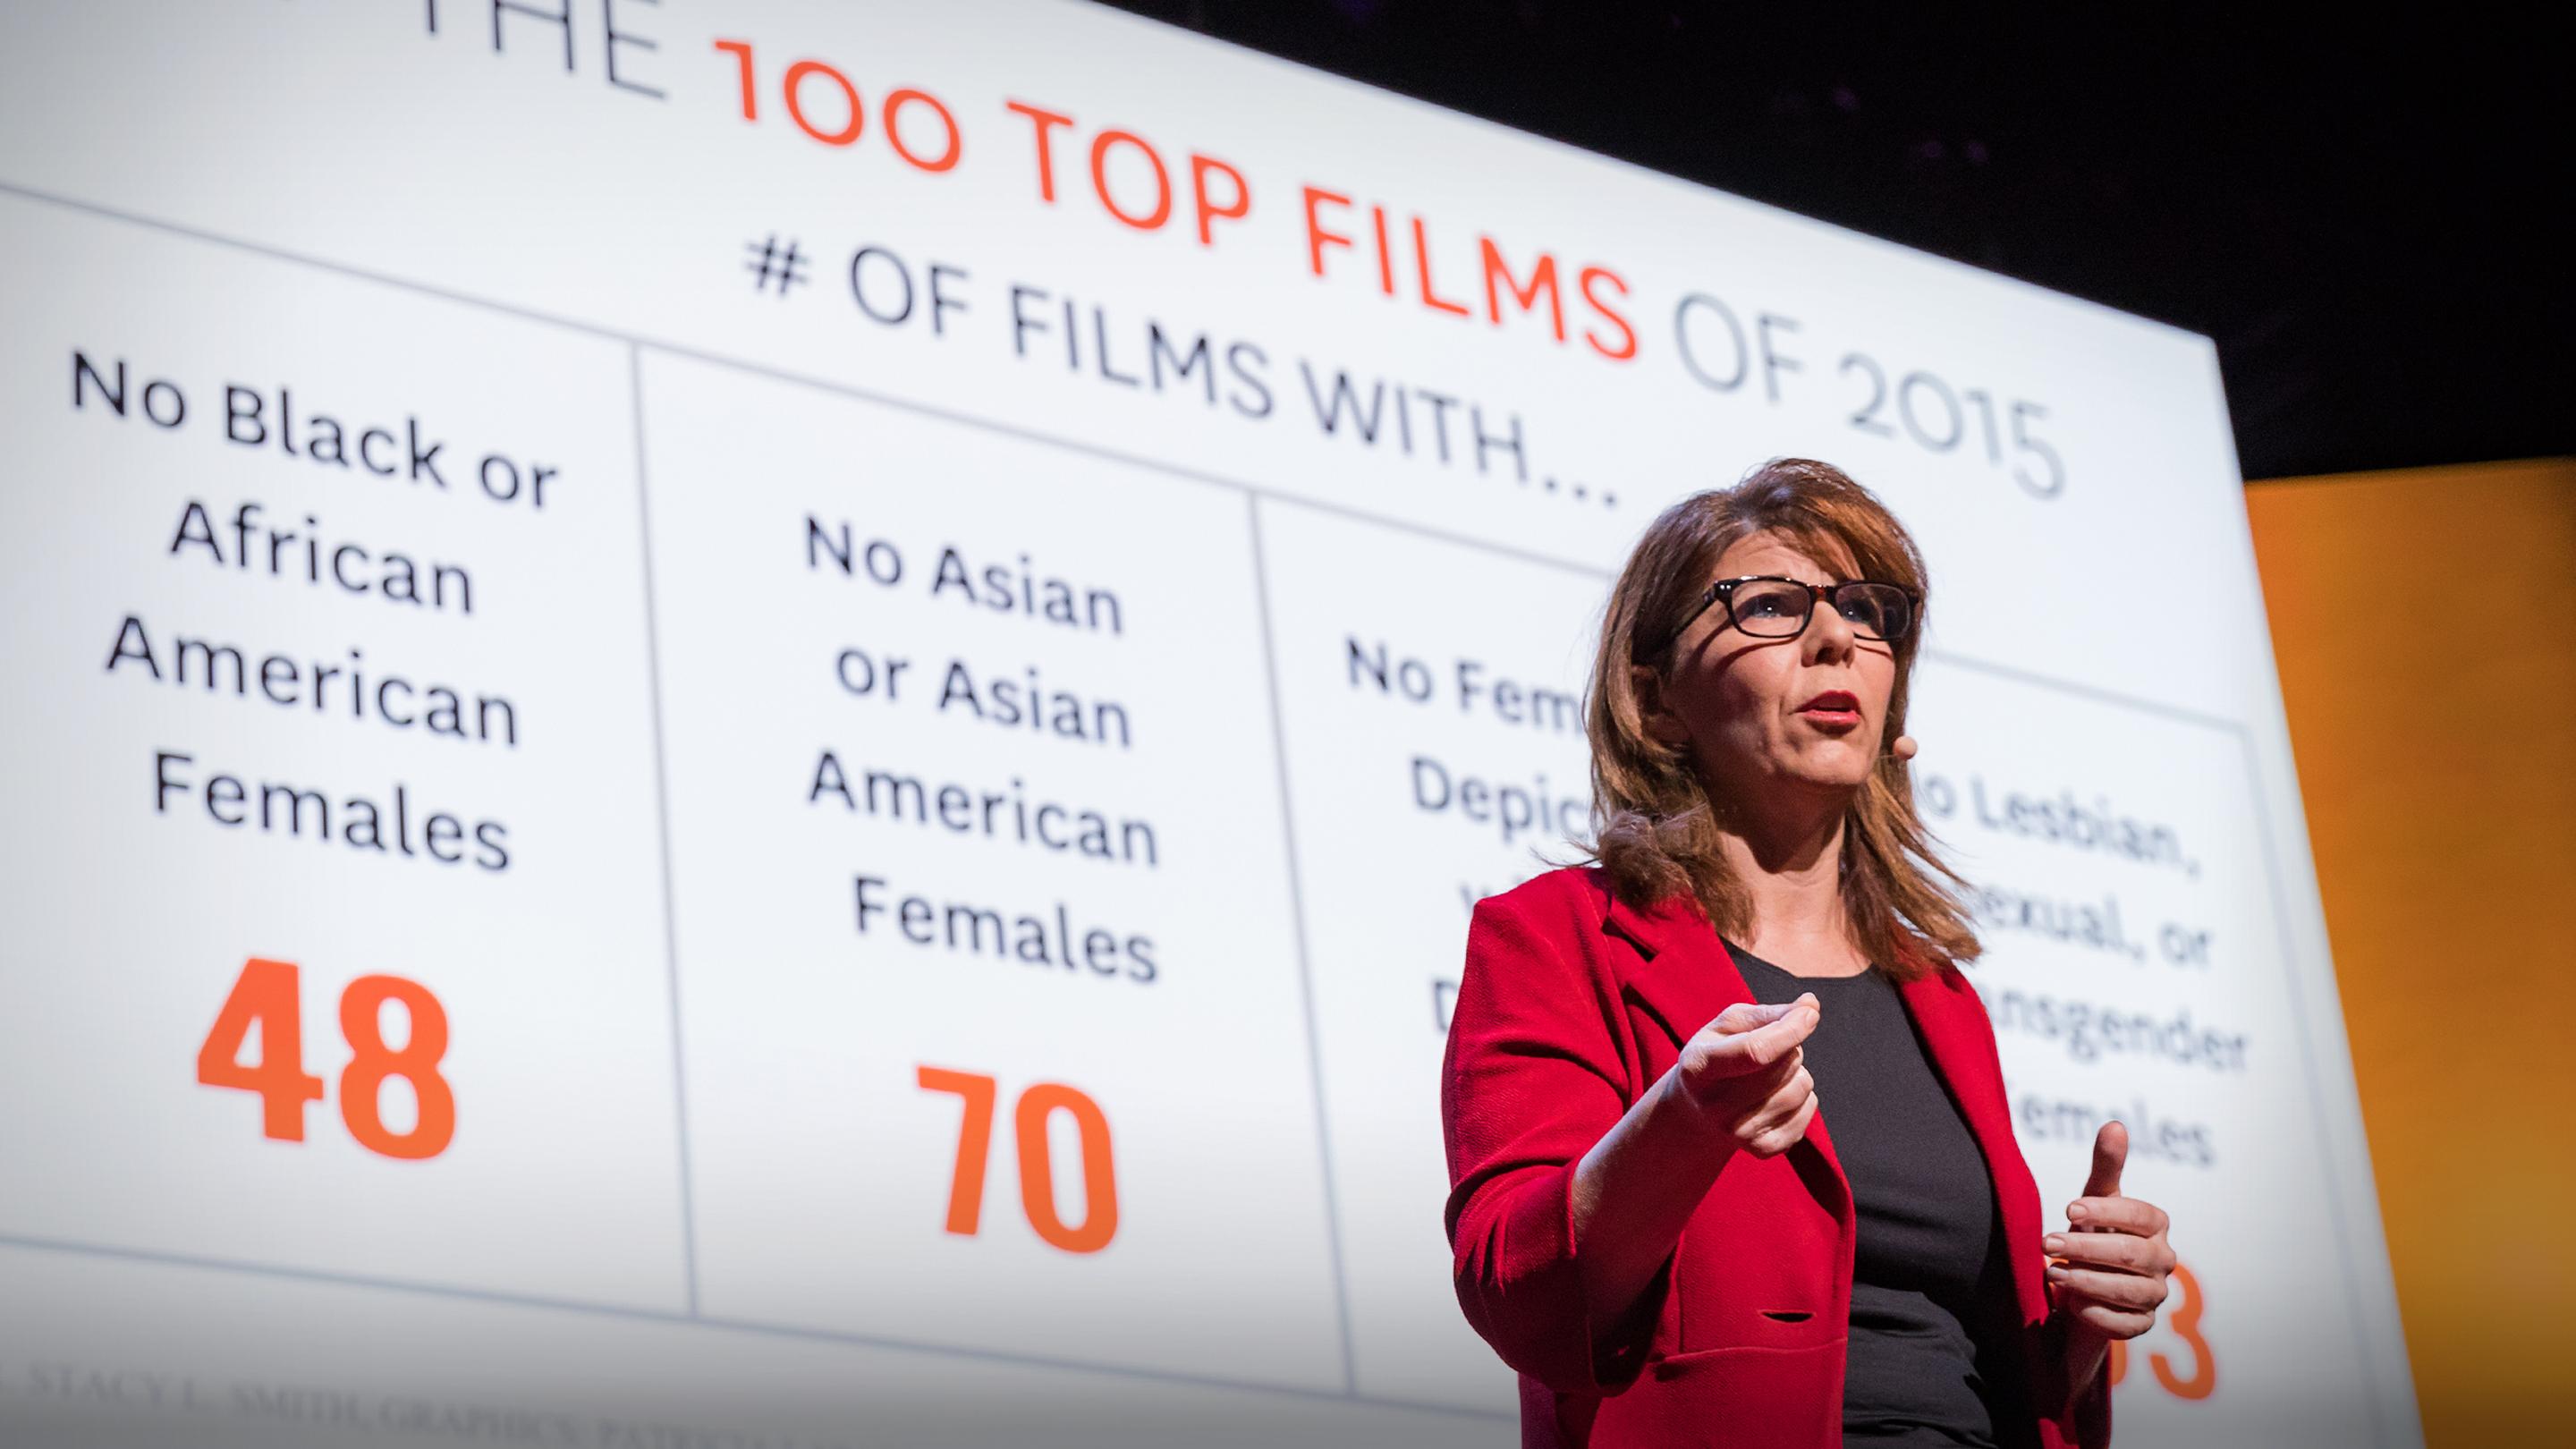 The data behind Hollywood’s sexism | Stacy Smith